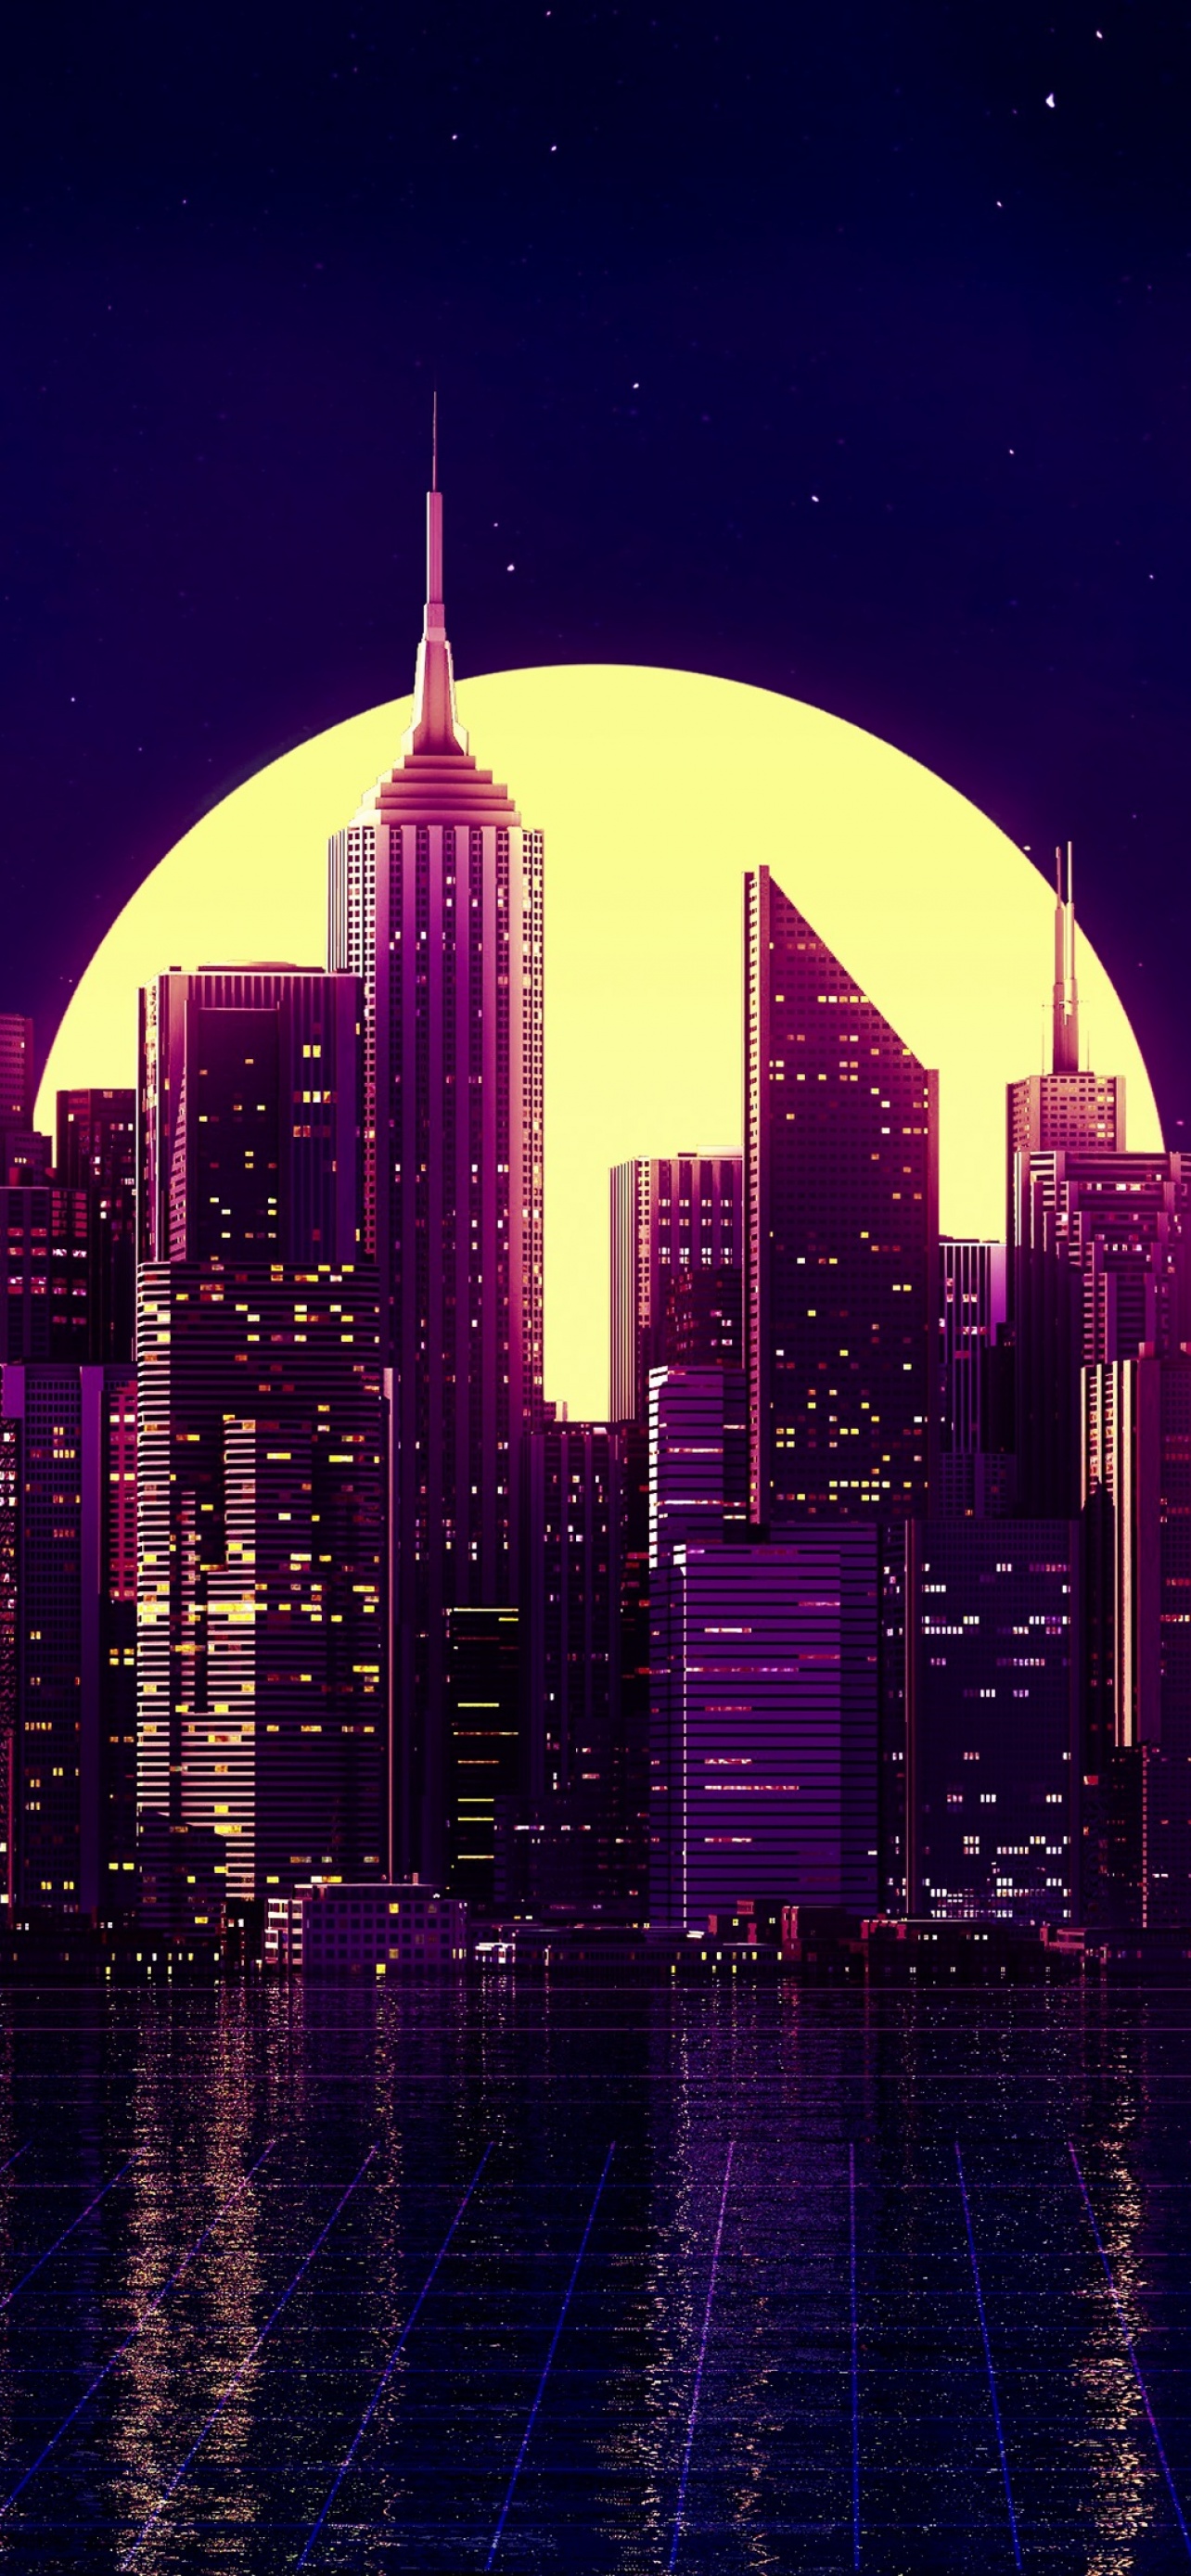 Synthwave Wallpaper by NeonOverdrive on DeviantArt